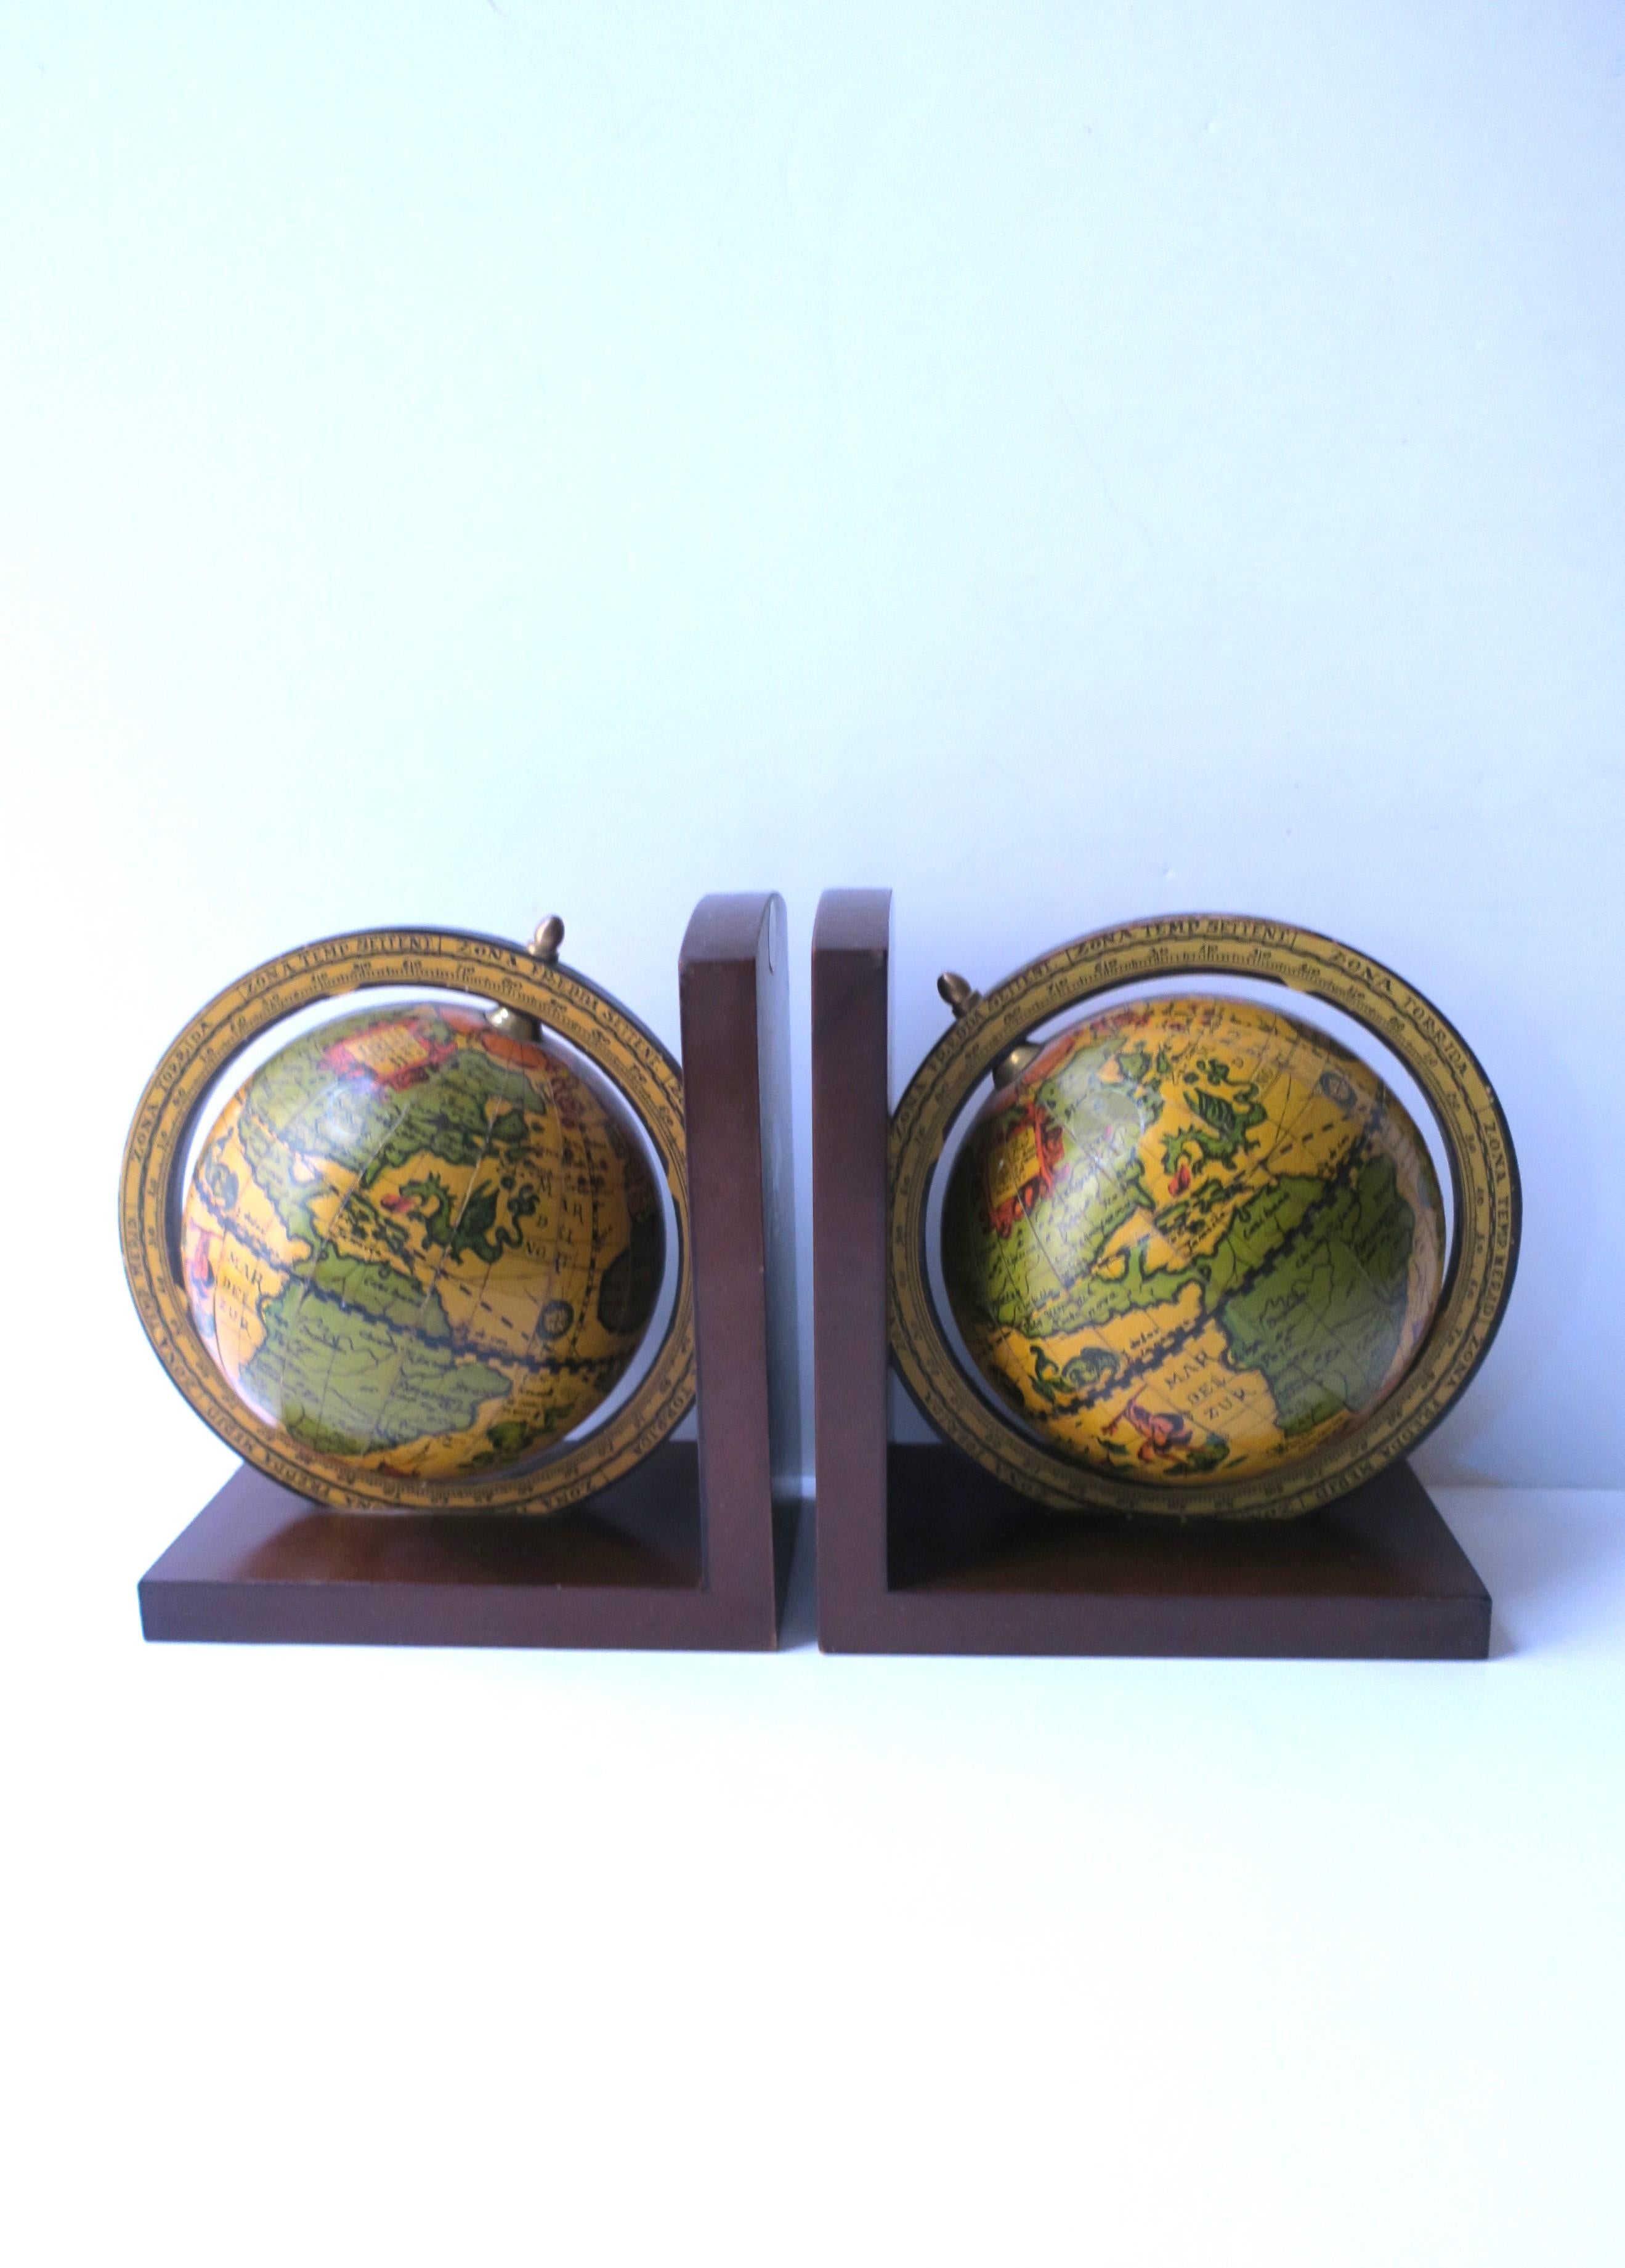 An Italian pair of world globe bookends with brass accents, circa mid-20th century, Italy. A great pair for an office, library, living room, etc. Marked 'Made in Italy' on back as shown in last three images. Very good condition as shown in images